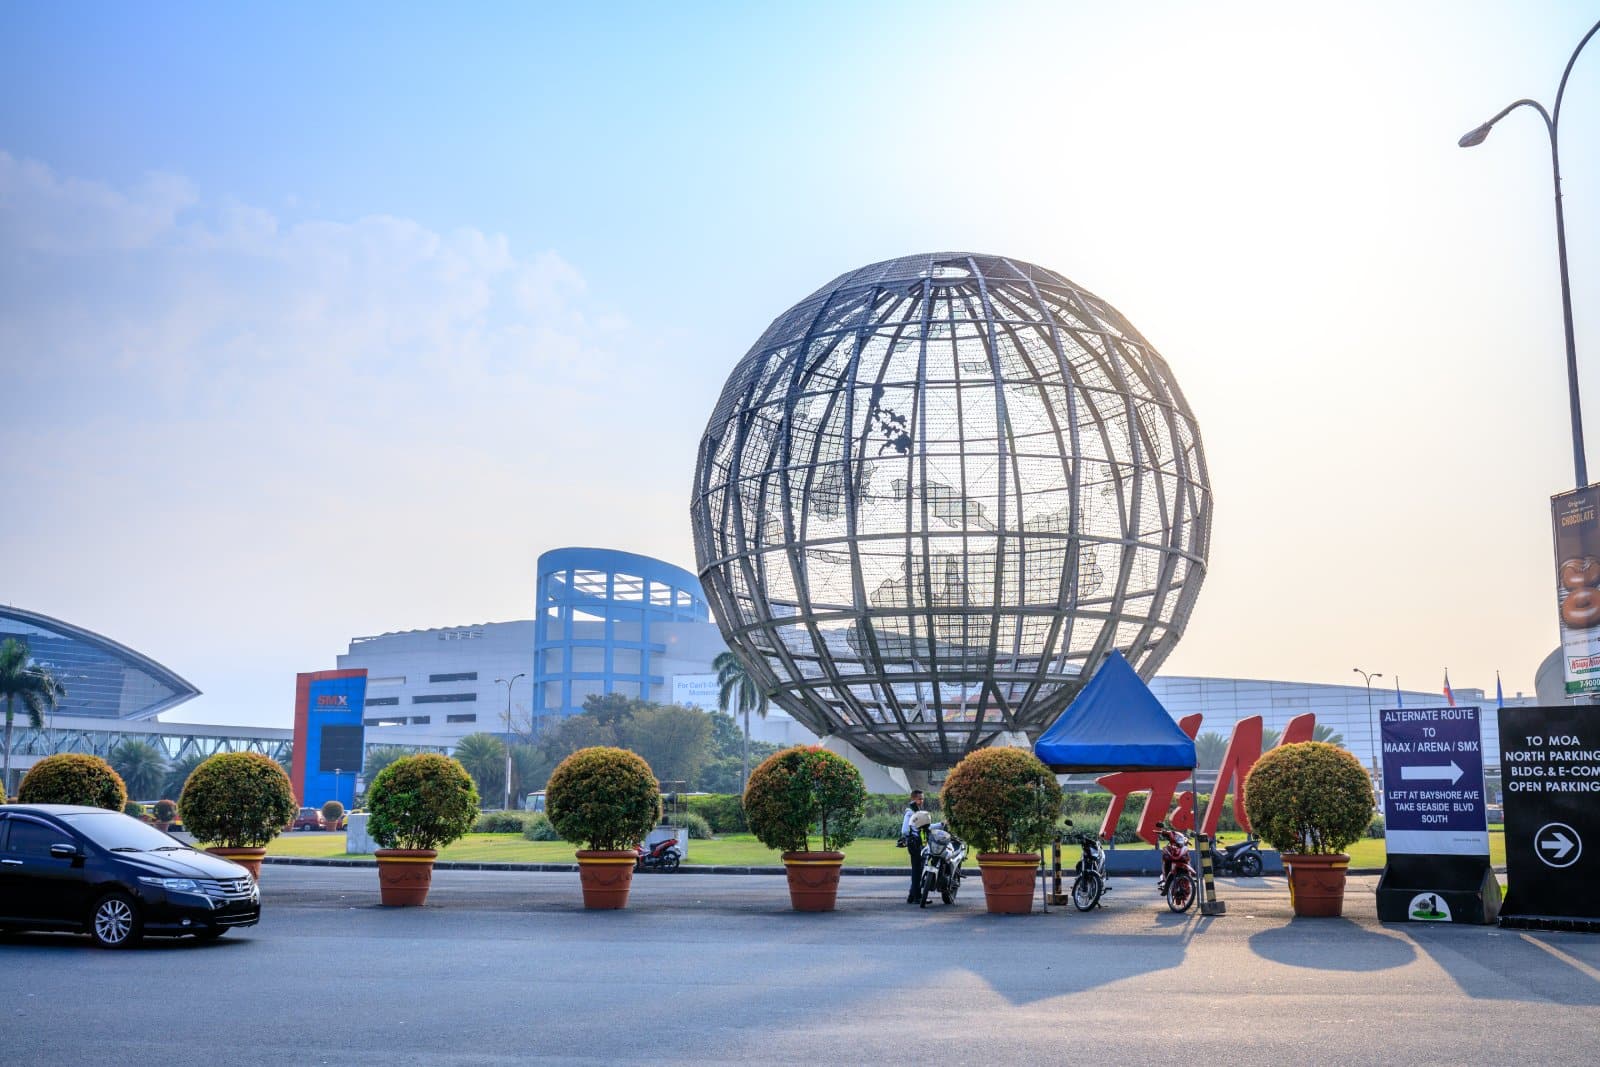 <p class="wp-caption-text">Image Credit: Shutterstock / ARTYOORAN</p>  <p><span>The SM Mall of Asia, commonly called MOA, is a vast shopping, entertainment, and dining complex in Bay City, Pasay. Since its opening in 2006, it has become one of the largest malls in the Philippines and is among the biggest shopping centers in Asia. Developed by SM Prime Holdings, the leading mall operator in the country, MOA spans a total gross floor area of approximately 432,891 square meters, making it a pivotal landmark in the region.</span></p> <p><span>The Mall of Asia complex is distinguished by its comprehensive range of retail outlets, including numerous local and international brands across fashion, electronics, home furnishings, and more. Beyond retail, MOA features various dining options, from fast food to gourmet restaurants, catering to diverse tastes and preferences. The mall is also known for its entertainment facilities, which include a state-of-the-art IMAX theater, an Olympic-sized ice skating rink, and the MOA Arena.</span></p> <p><span>Architecturally, the mall incorporates open spaces and waterfront areas, offering visitors scenic views of Manila Bay. Its design facilitates natural ventilation and ample sunlight, enhancing the shopping experience. The SM Mall of Asia’s iconic globe and the seaside promenade are popular spots for locals and tourists, providing a picturesque backdrop for leisure and social gatherings.</span></p> <p><b>My Insider’s Tip:</b><span> Check the CCP’s schedule to catch a live performance. These shows are a fantastic way to experience the Philippines’ rich artistic traditions.</span></p>